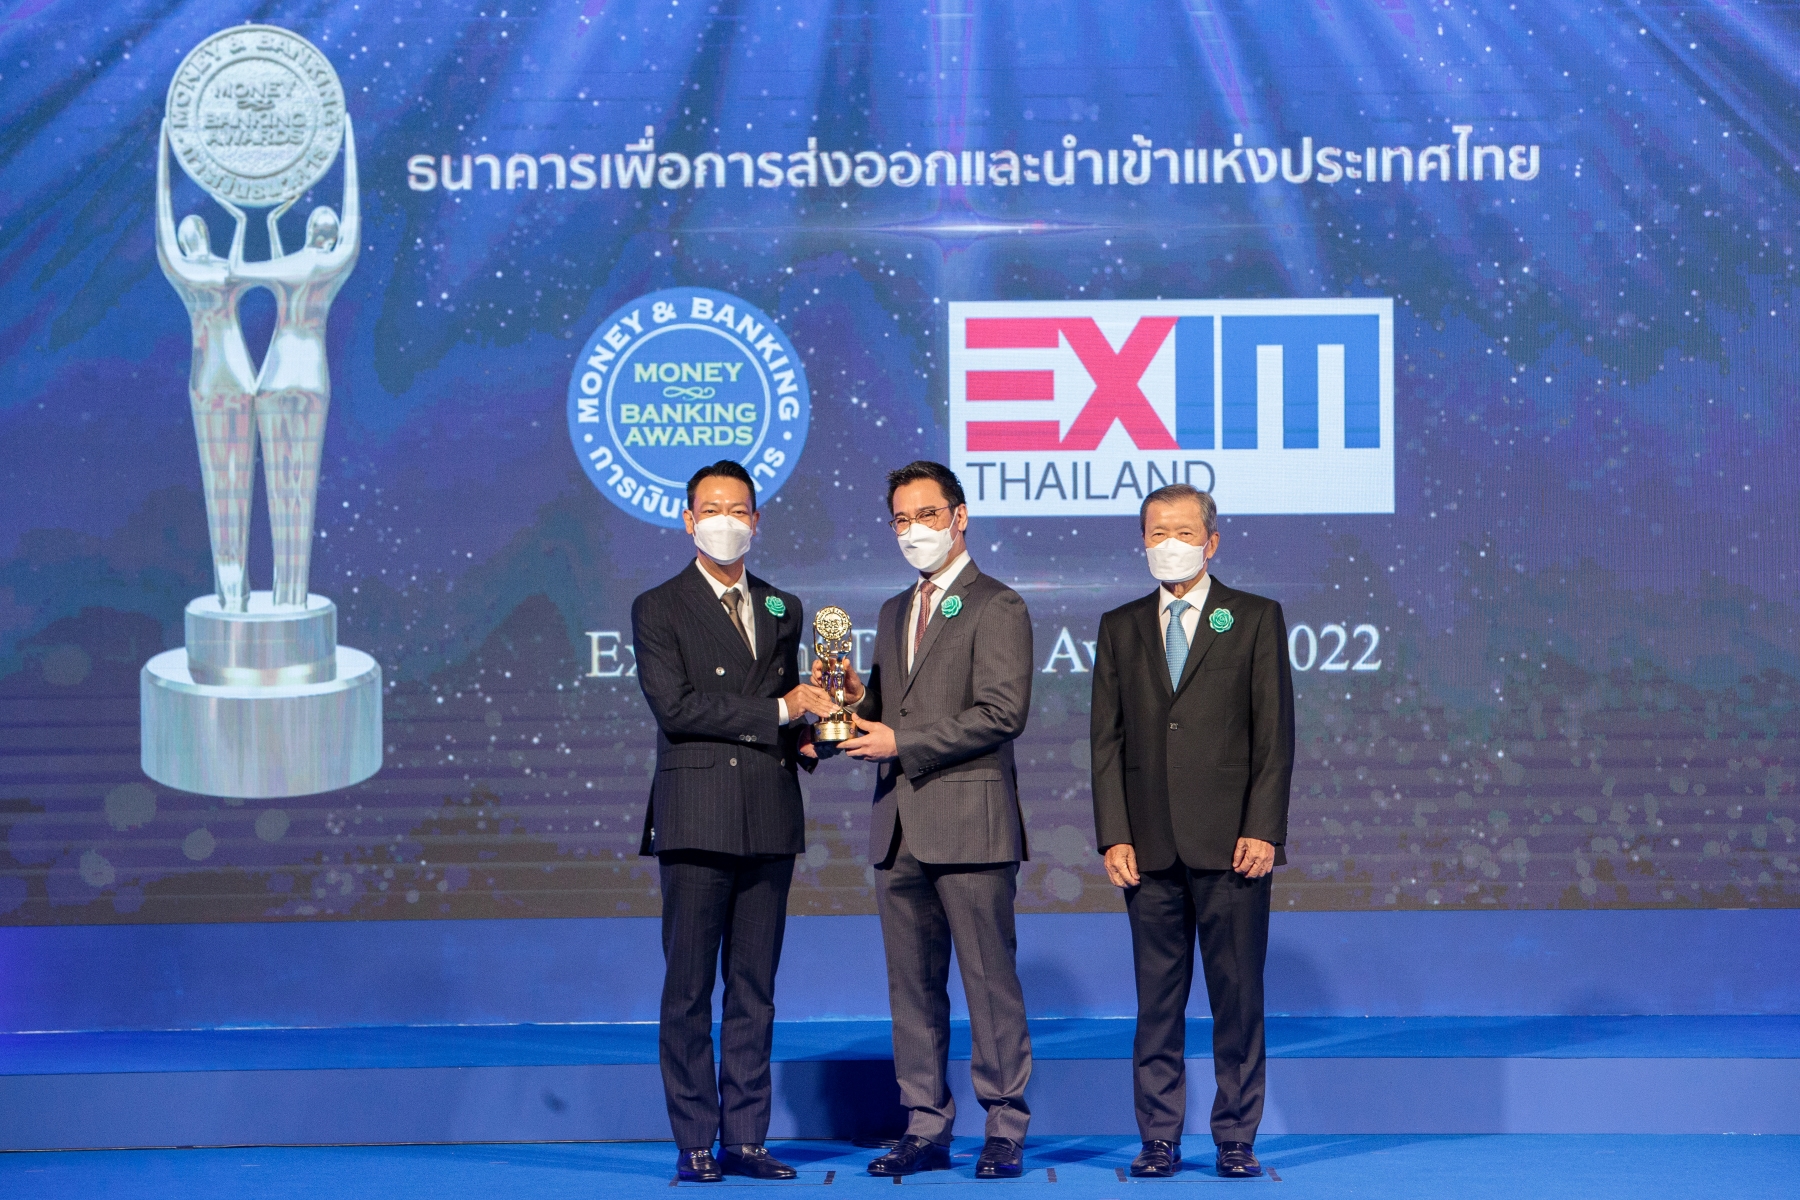 EXIM Thailand Received the “Best Design Excellence Award” at Money Expo 2022